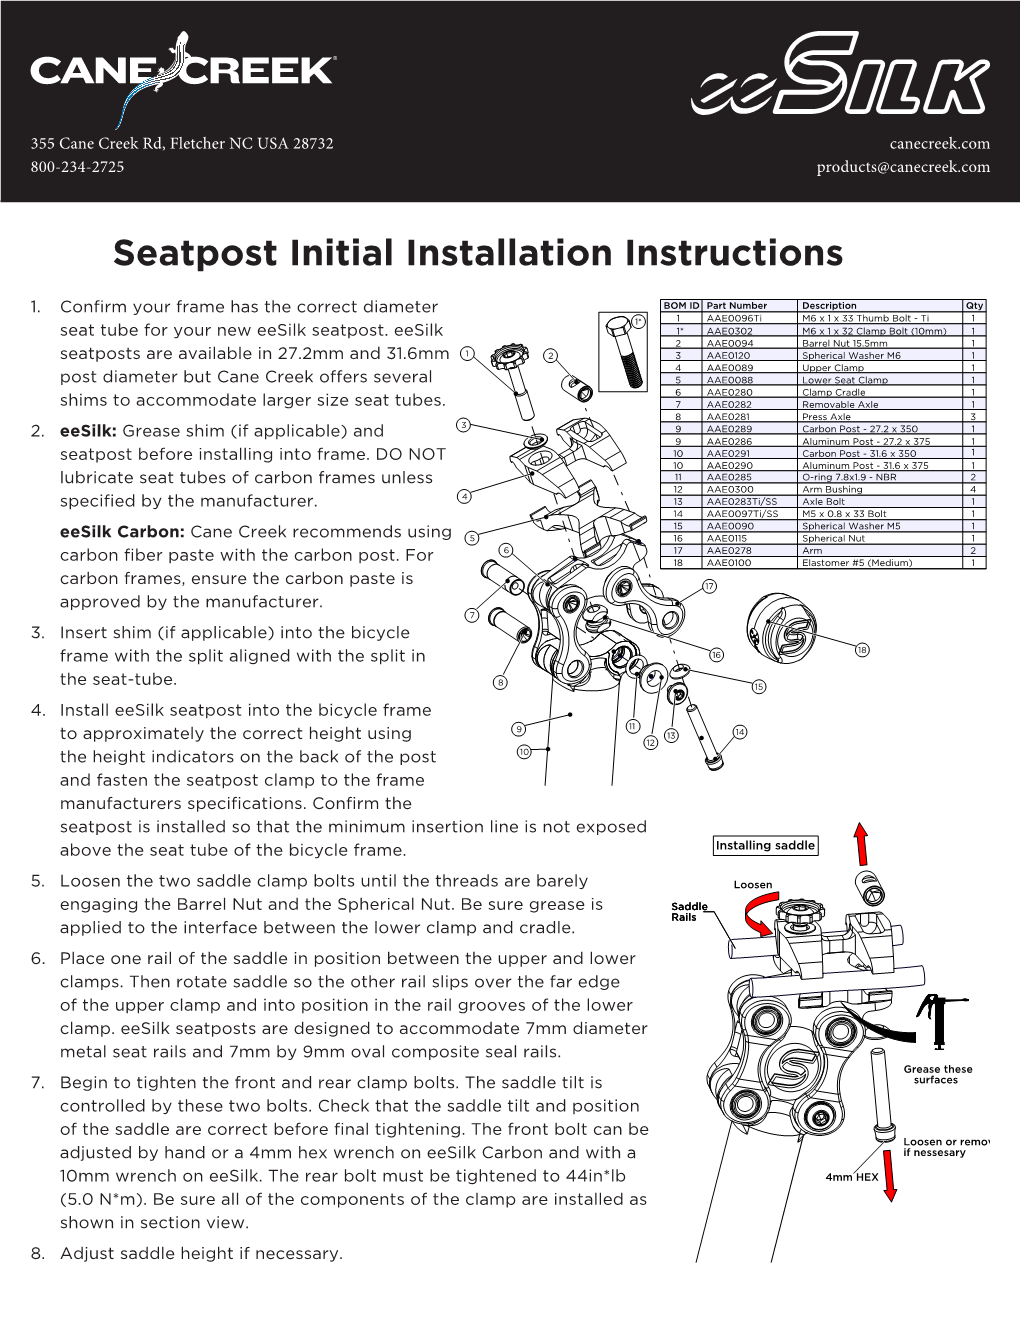 Seatpost Initial Installation Instructions